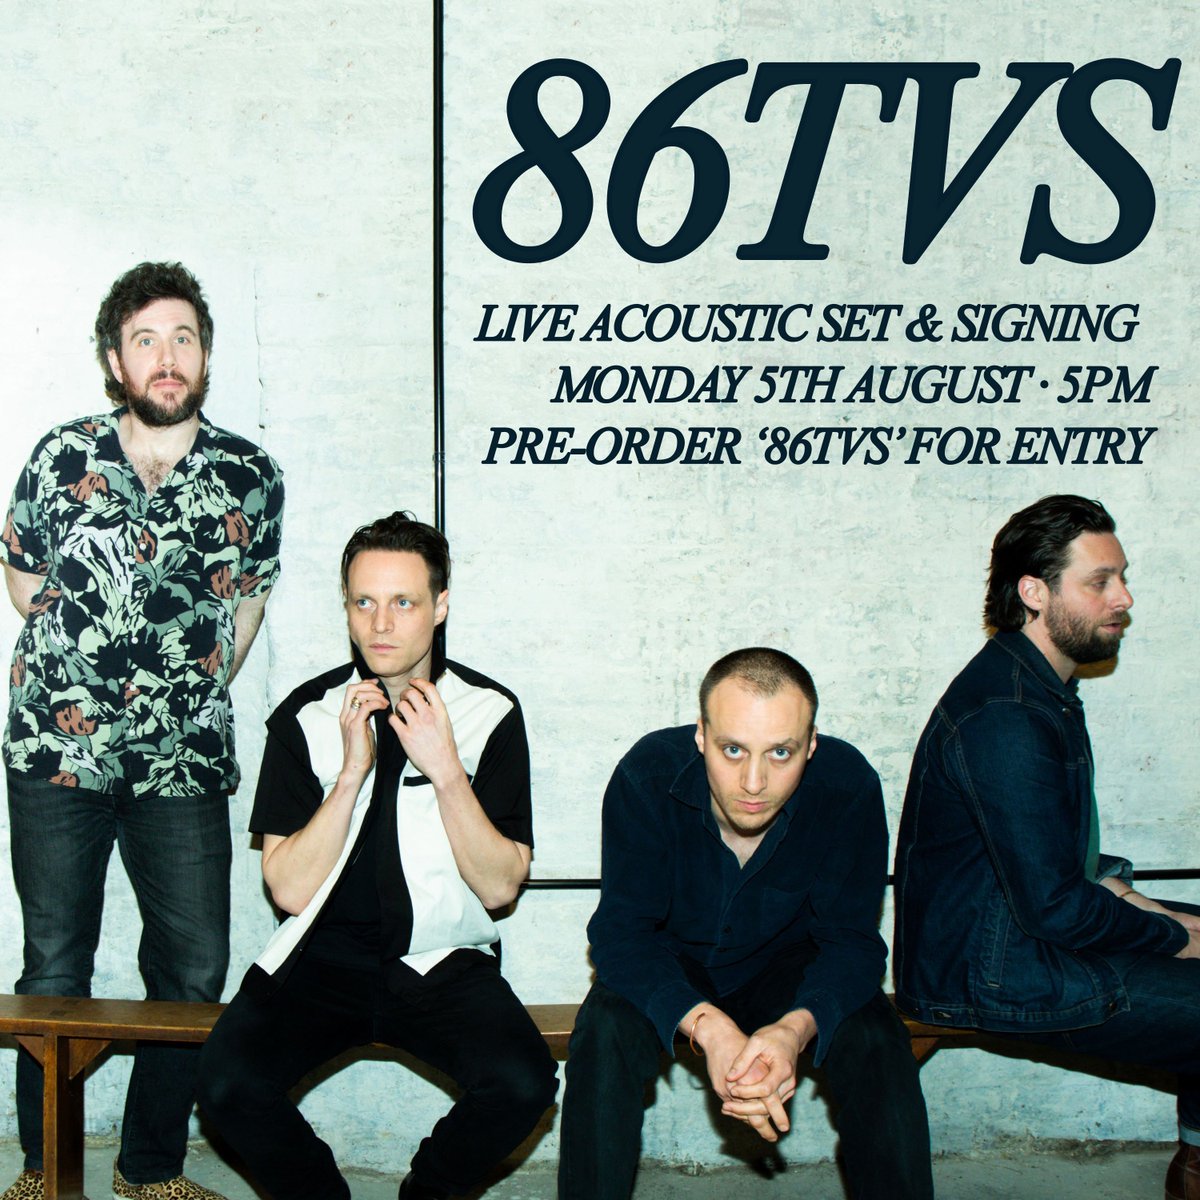 86TVs in-store! 📺 We're delighted to welcome 86TVs to Jumbo for a special acoustic in-store gig and signing on 05/08. Comprised of former Maccabees members- this should be a very busy one! For entry to the gig, pre-order the debut album from us here: jumborecords.co.uk/news-single.as…